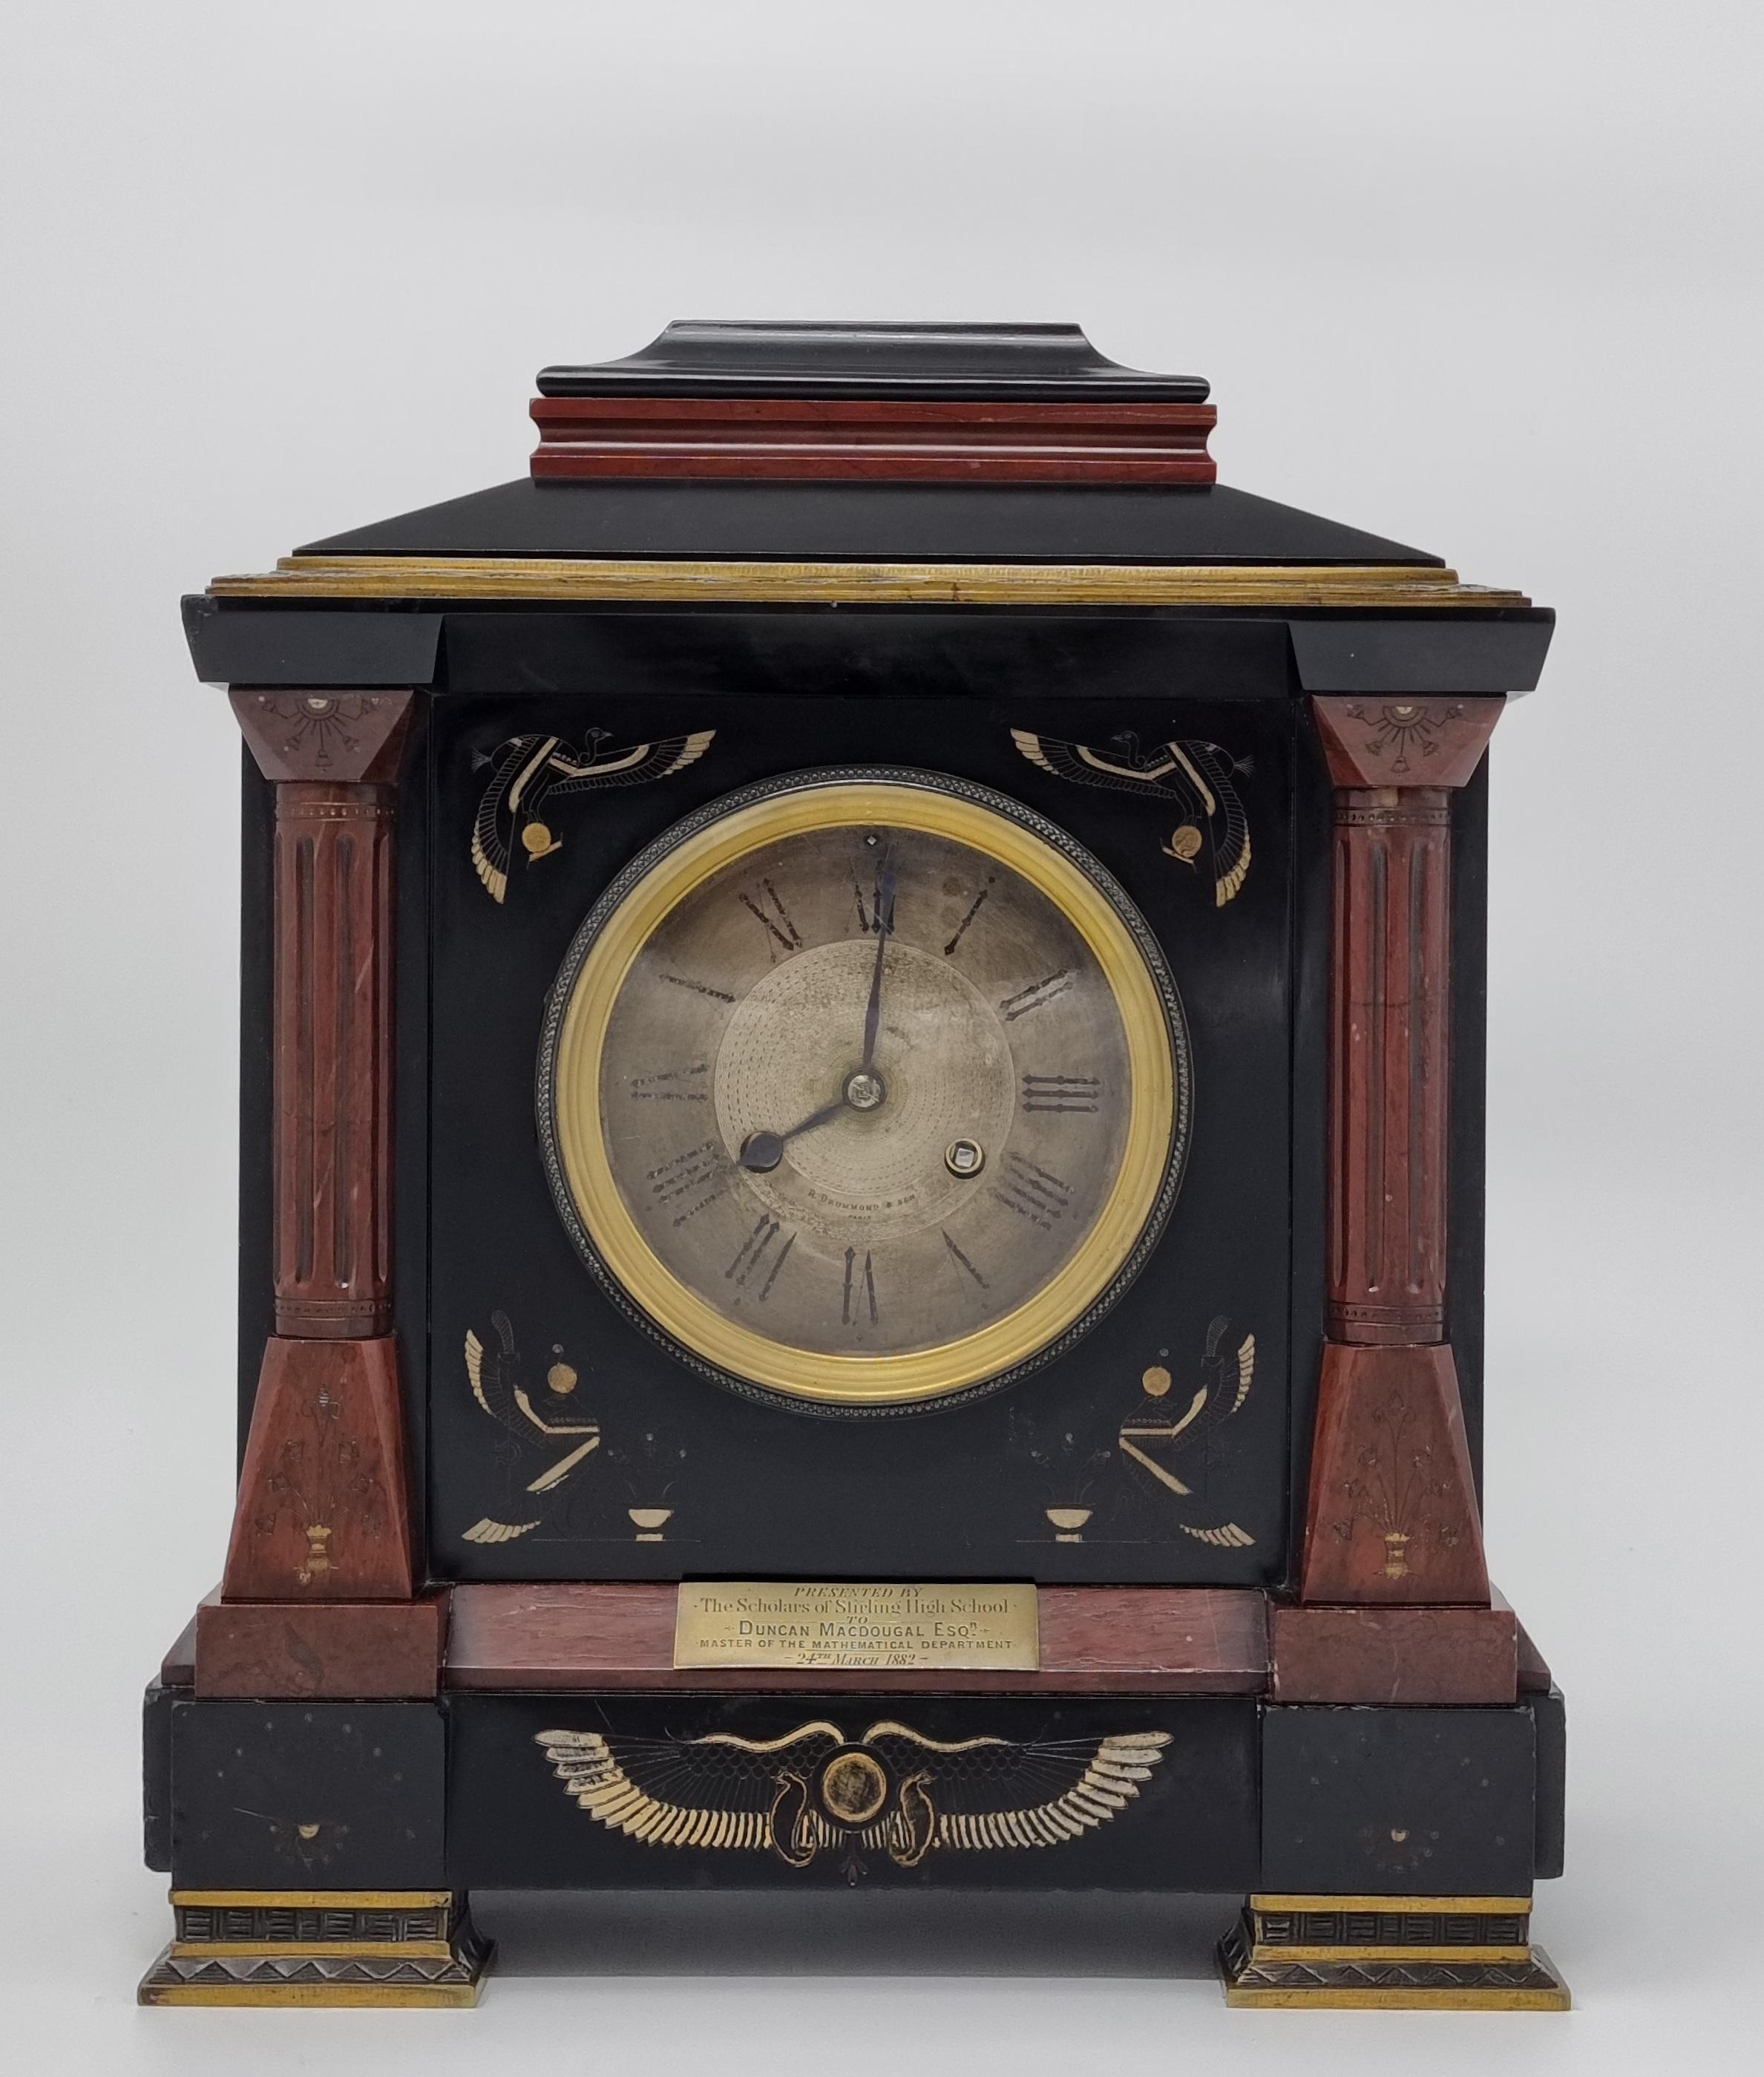 A highly unusual 19th Century Egyptian Revival Mantel Clock. Wonderful design architectural clock case with pagoda top, made of high quality red marble and black slate, all exquisitely decorated with bronze mouldings and hieroglyphics depicting